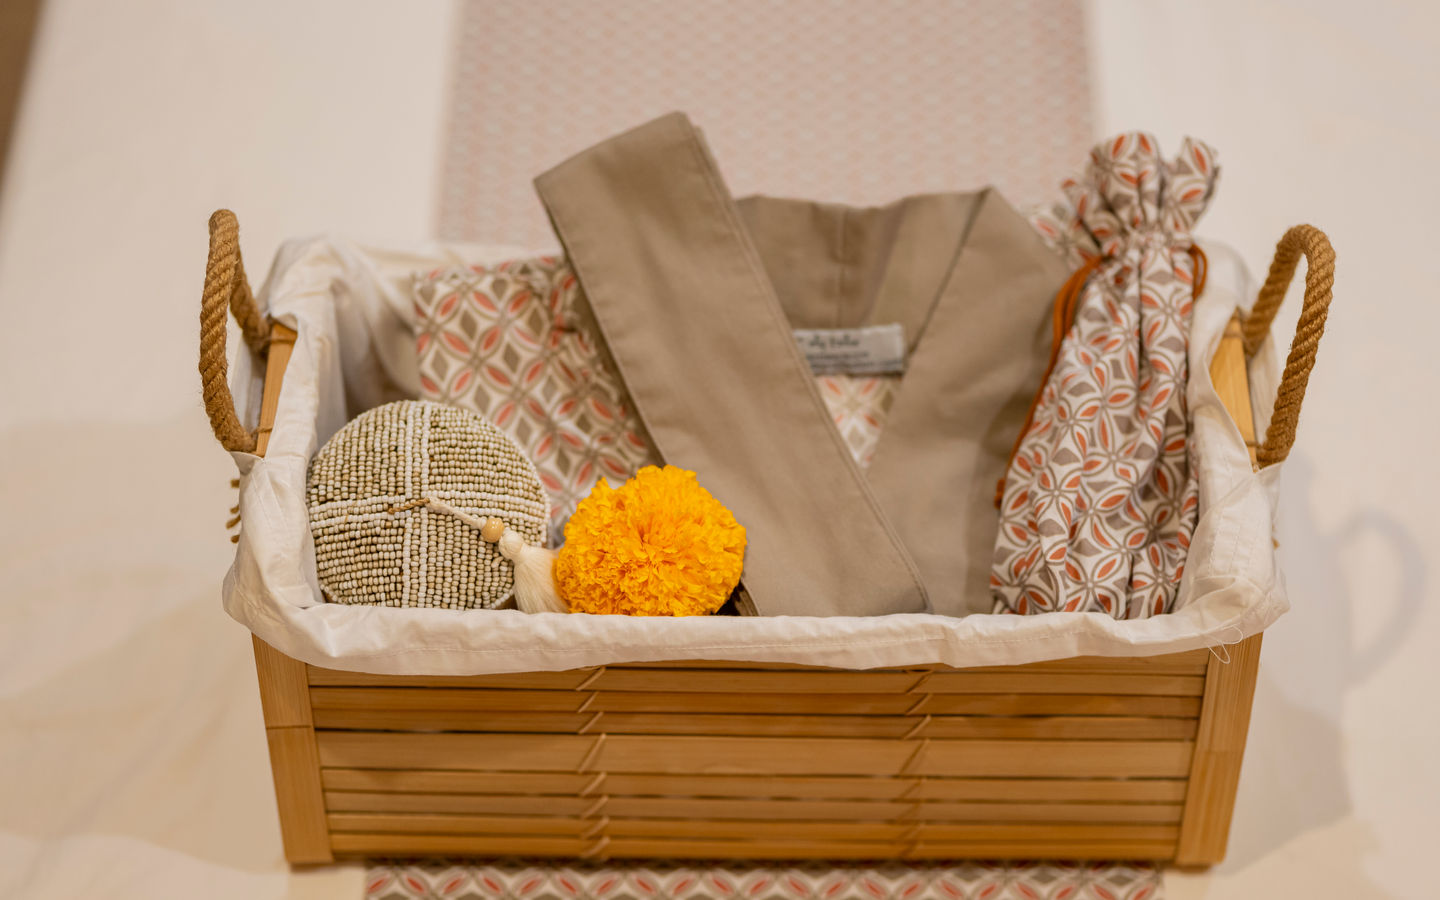 Photo of the spa amenities basket